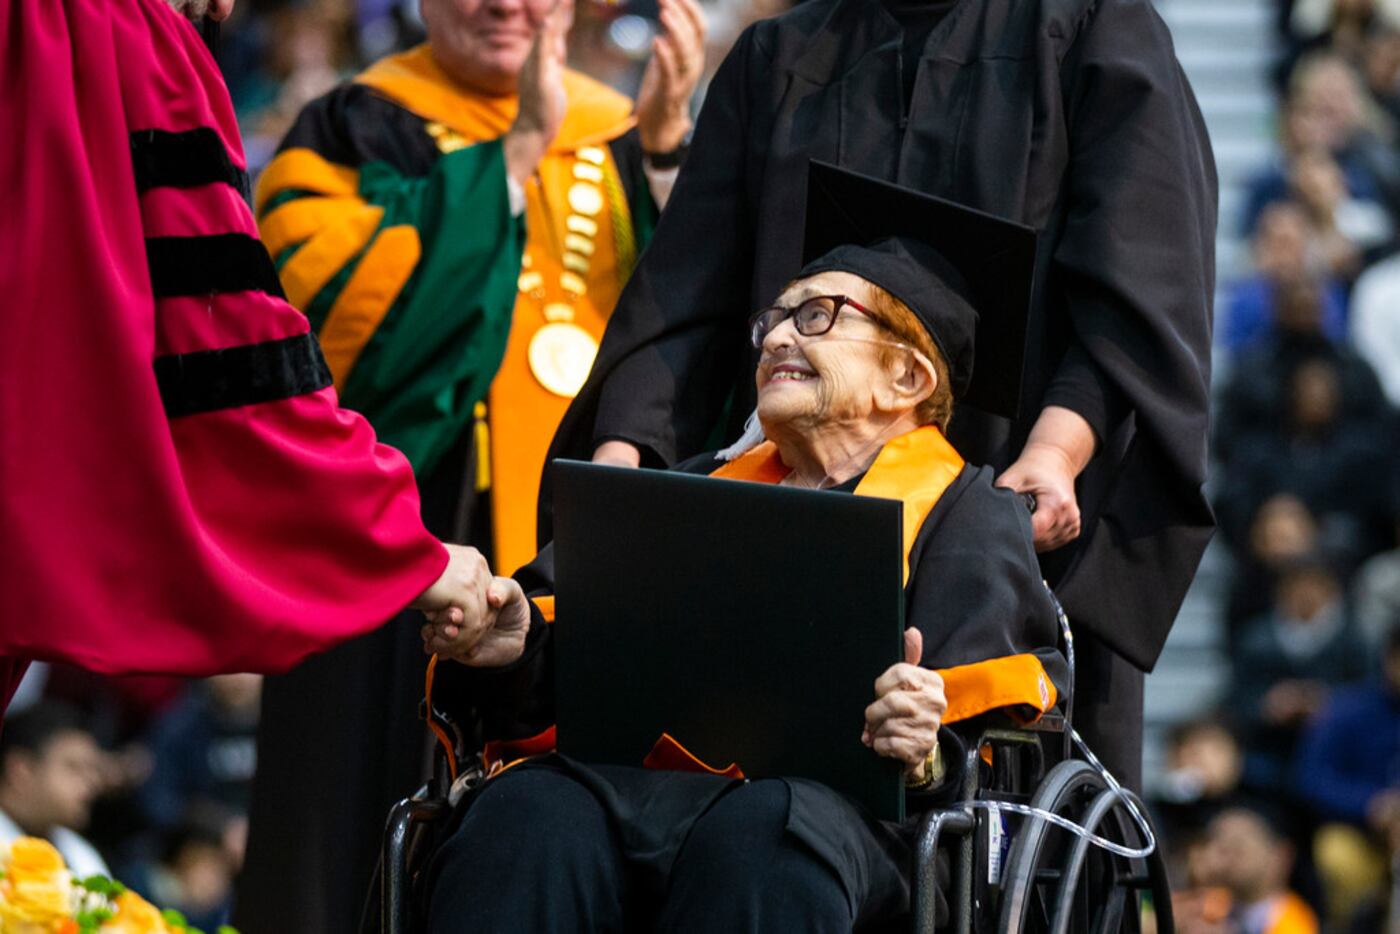 Janet Fein, 84, beamed as she crosses the stage during a commencement ceremony at UT Dallas...